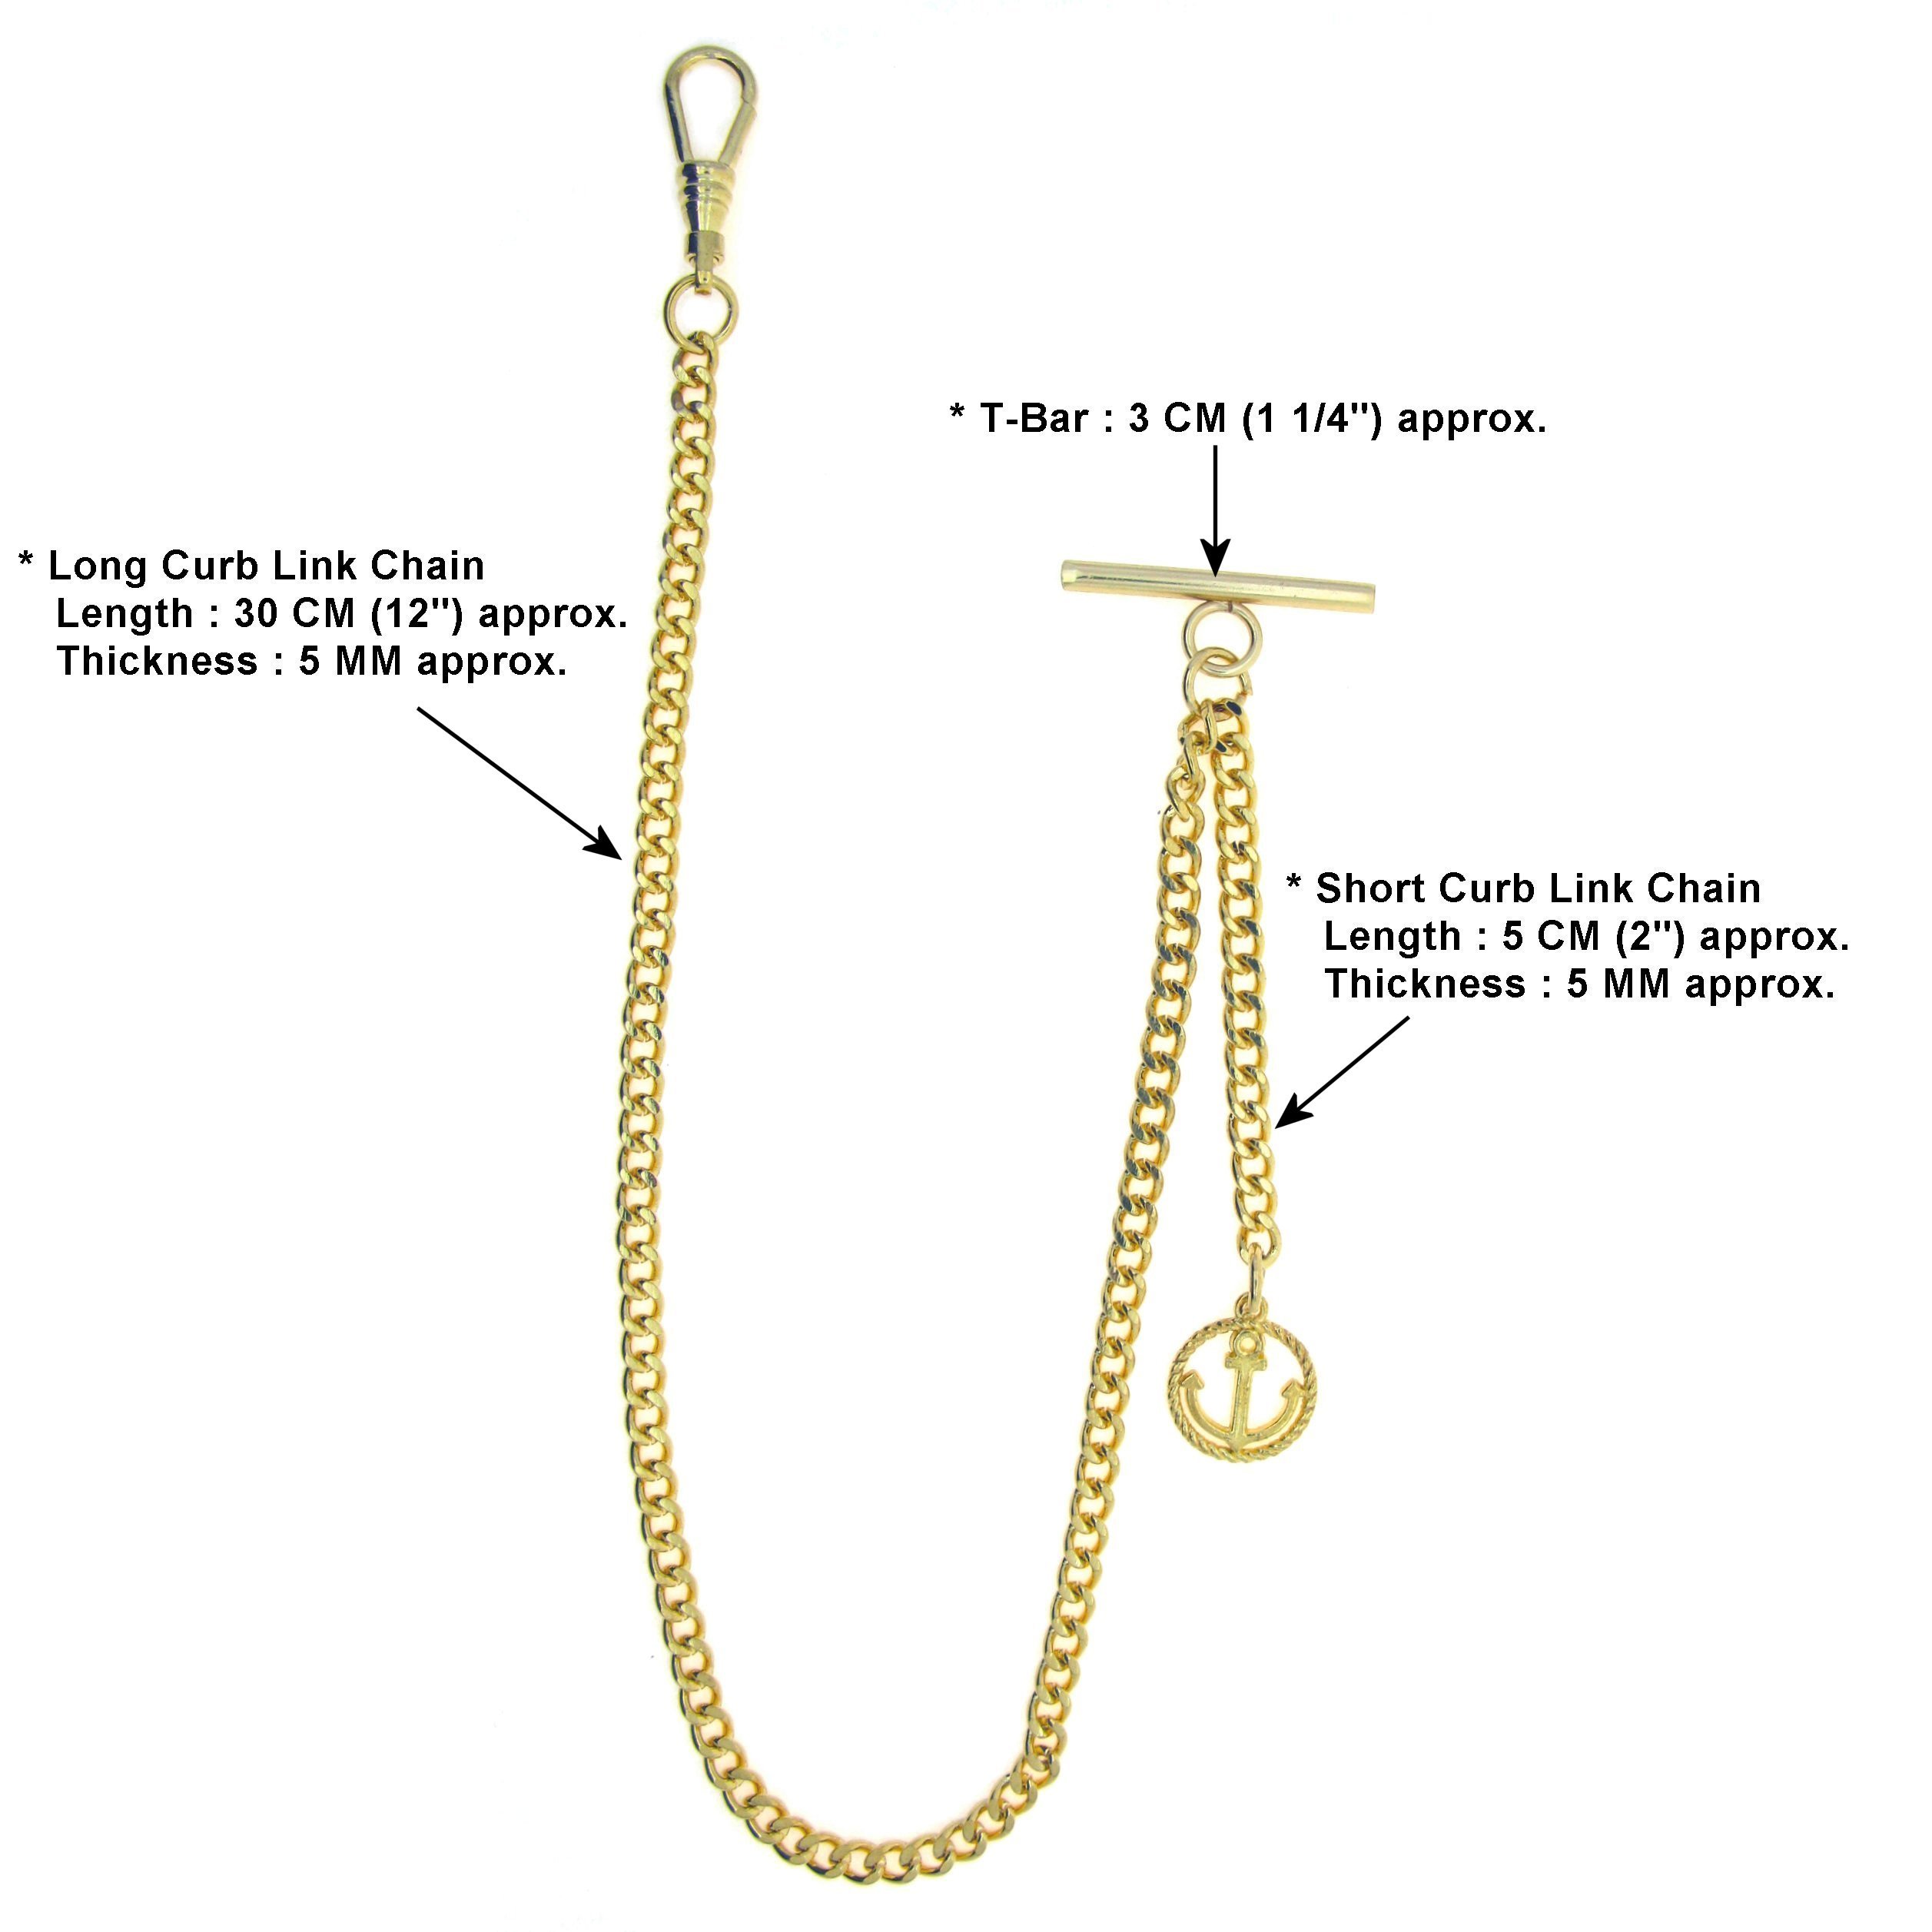 Albert Chain Gold Color Pocket Watch Chains Vest Chain for Men with T Bar Swivel Clasp and Anchor Medal Fob AC66